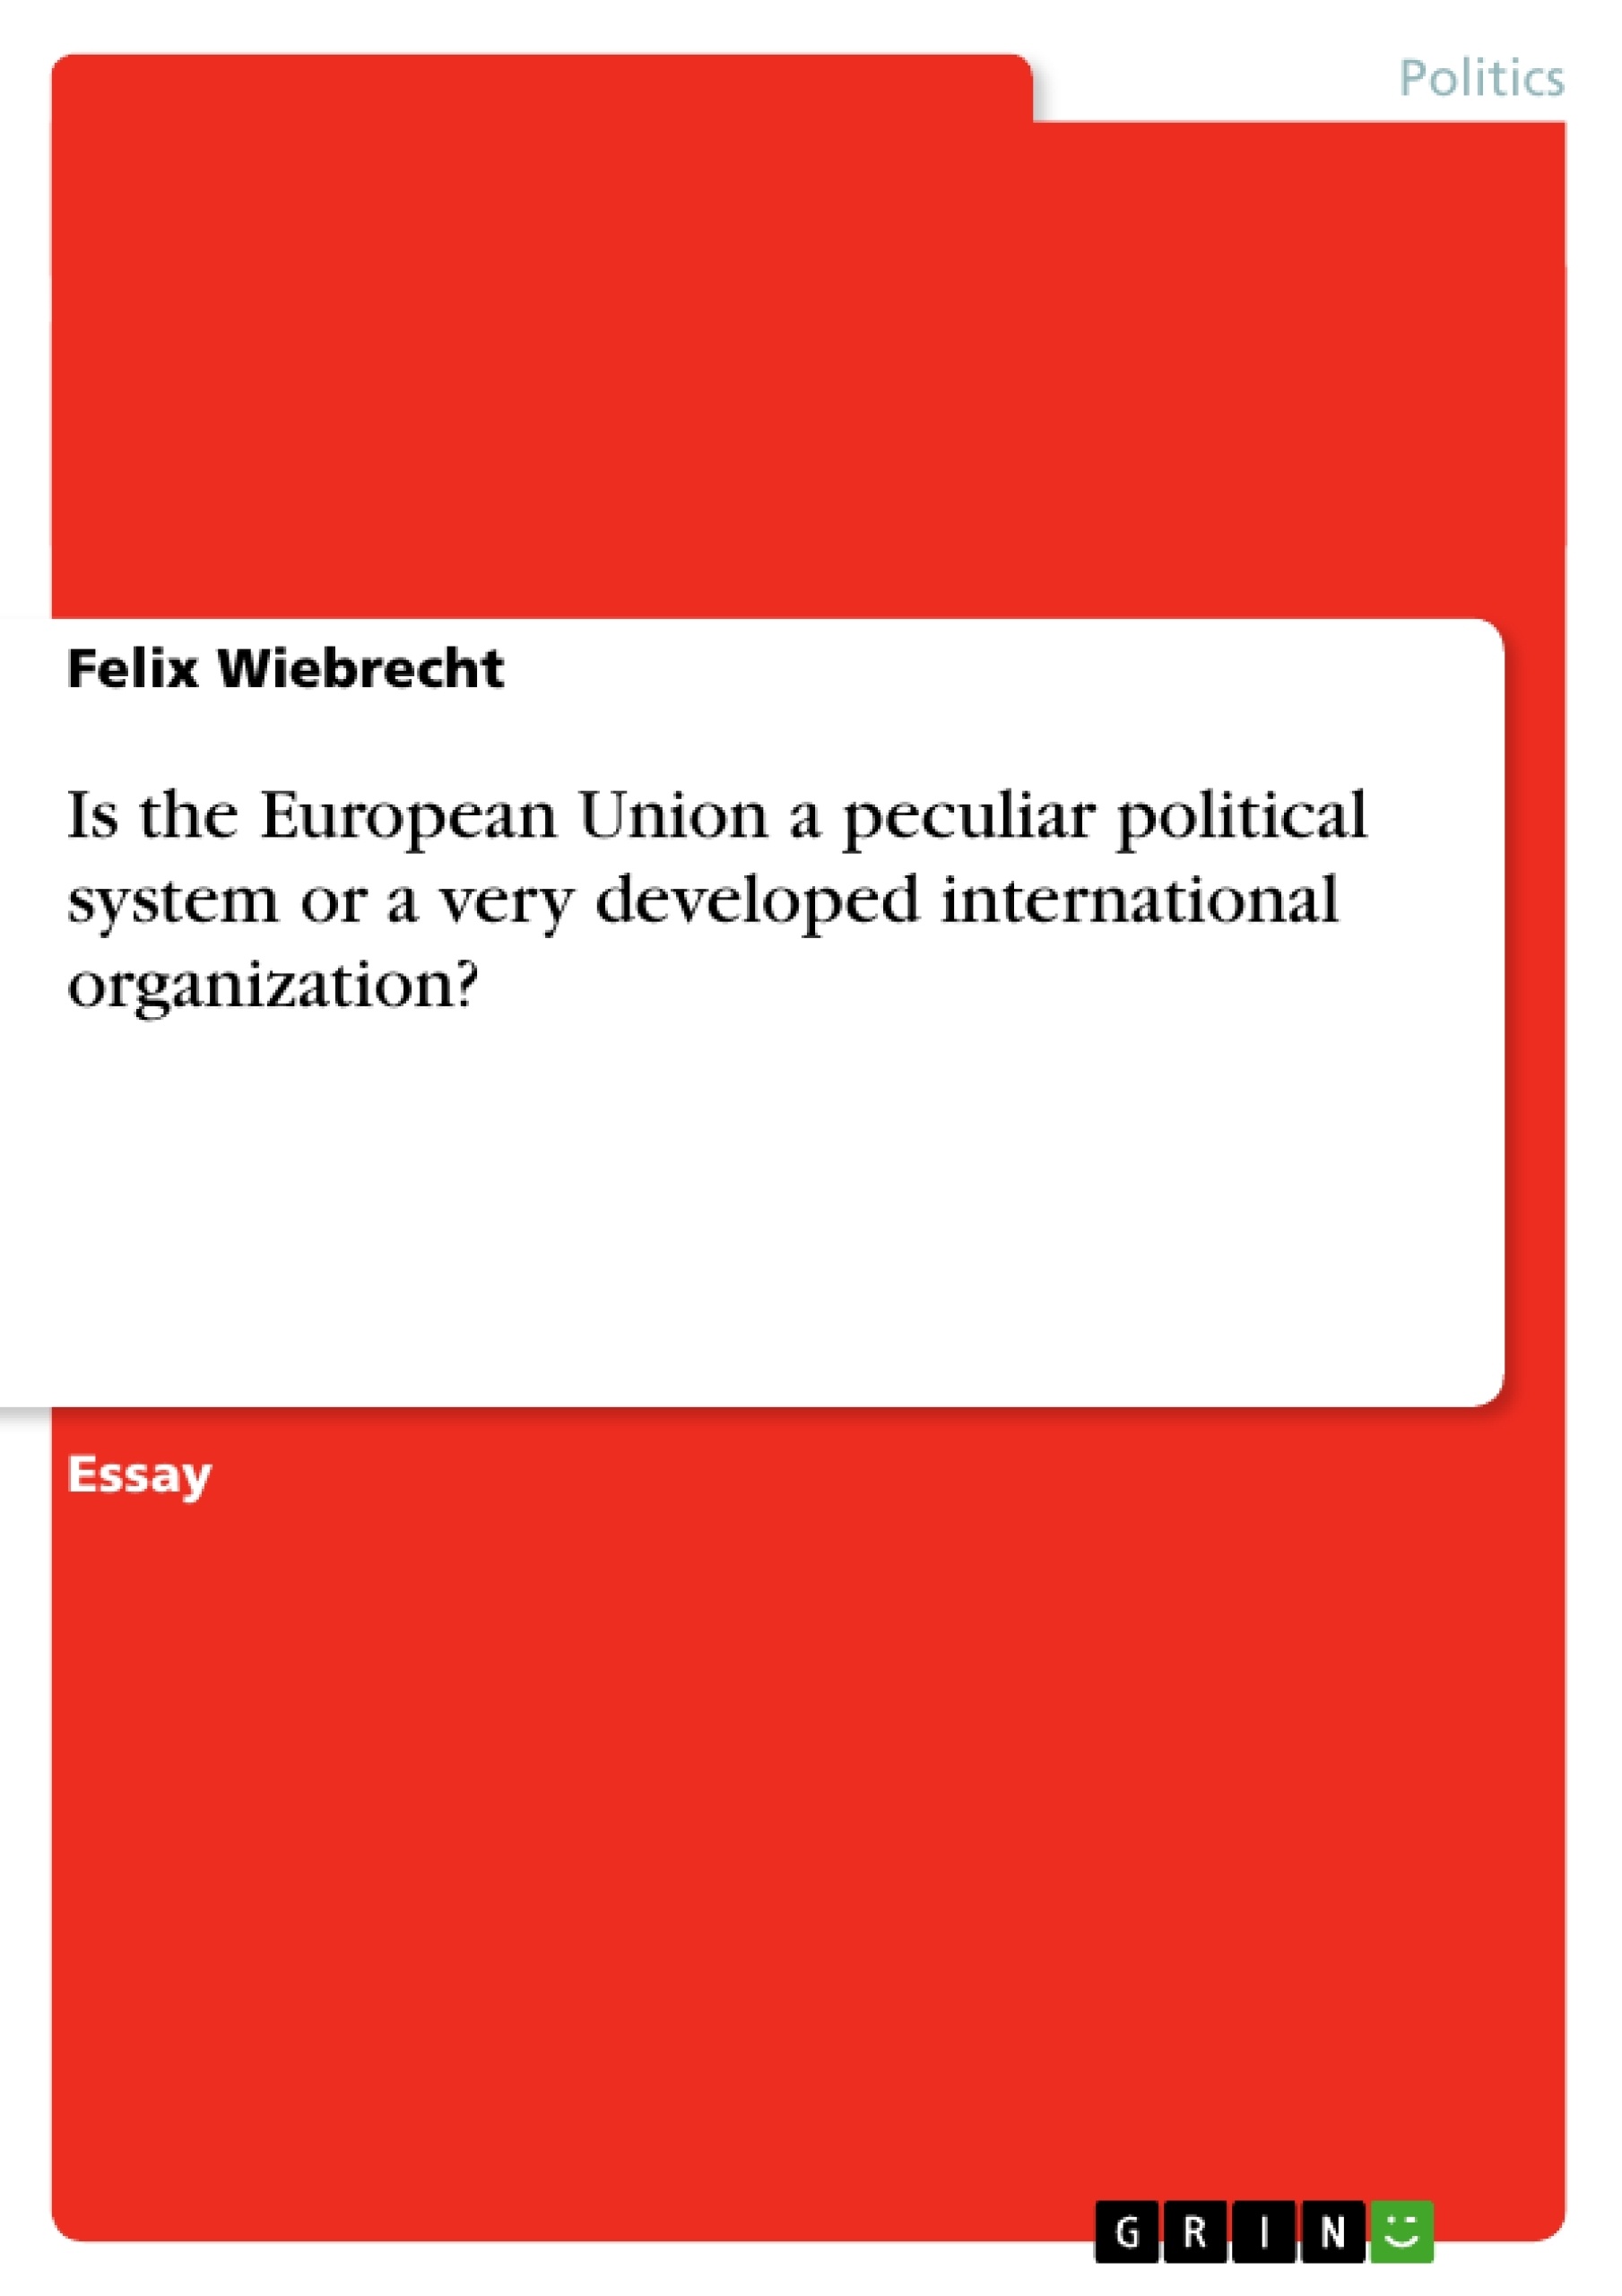 Title: Is the European Union a peculiar political system or a very developed international organization?